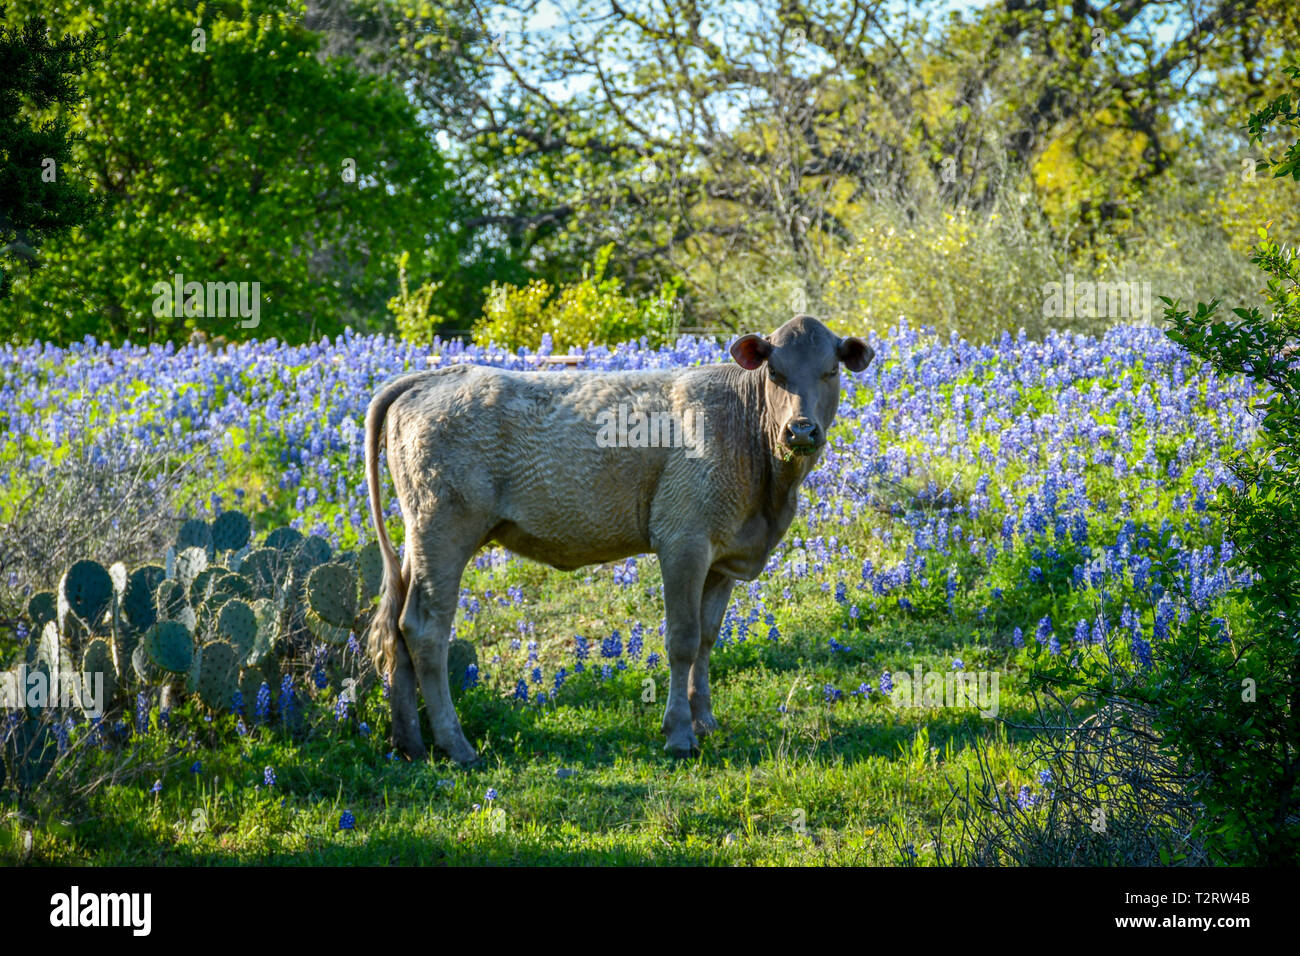 White cow in the Bluebonnets Stock Photo